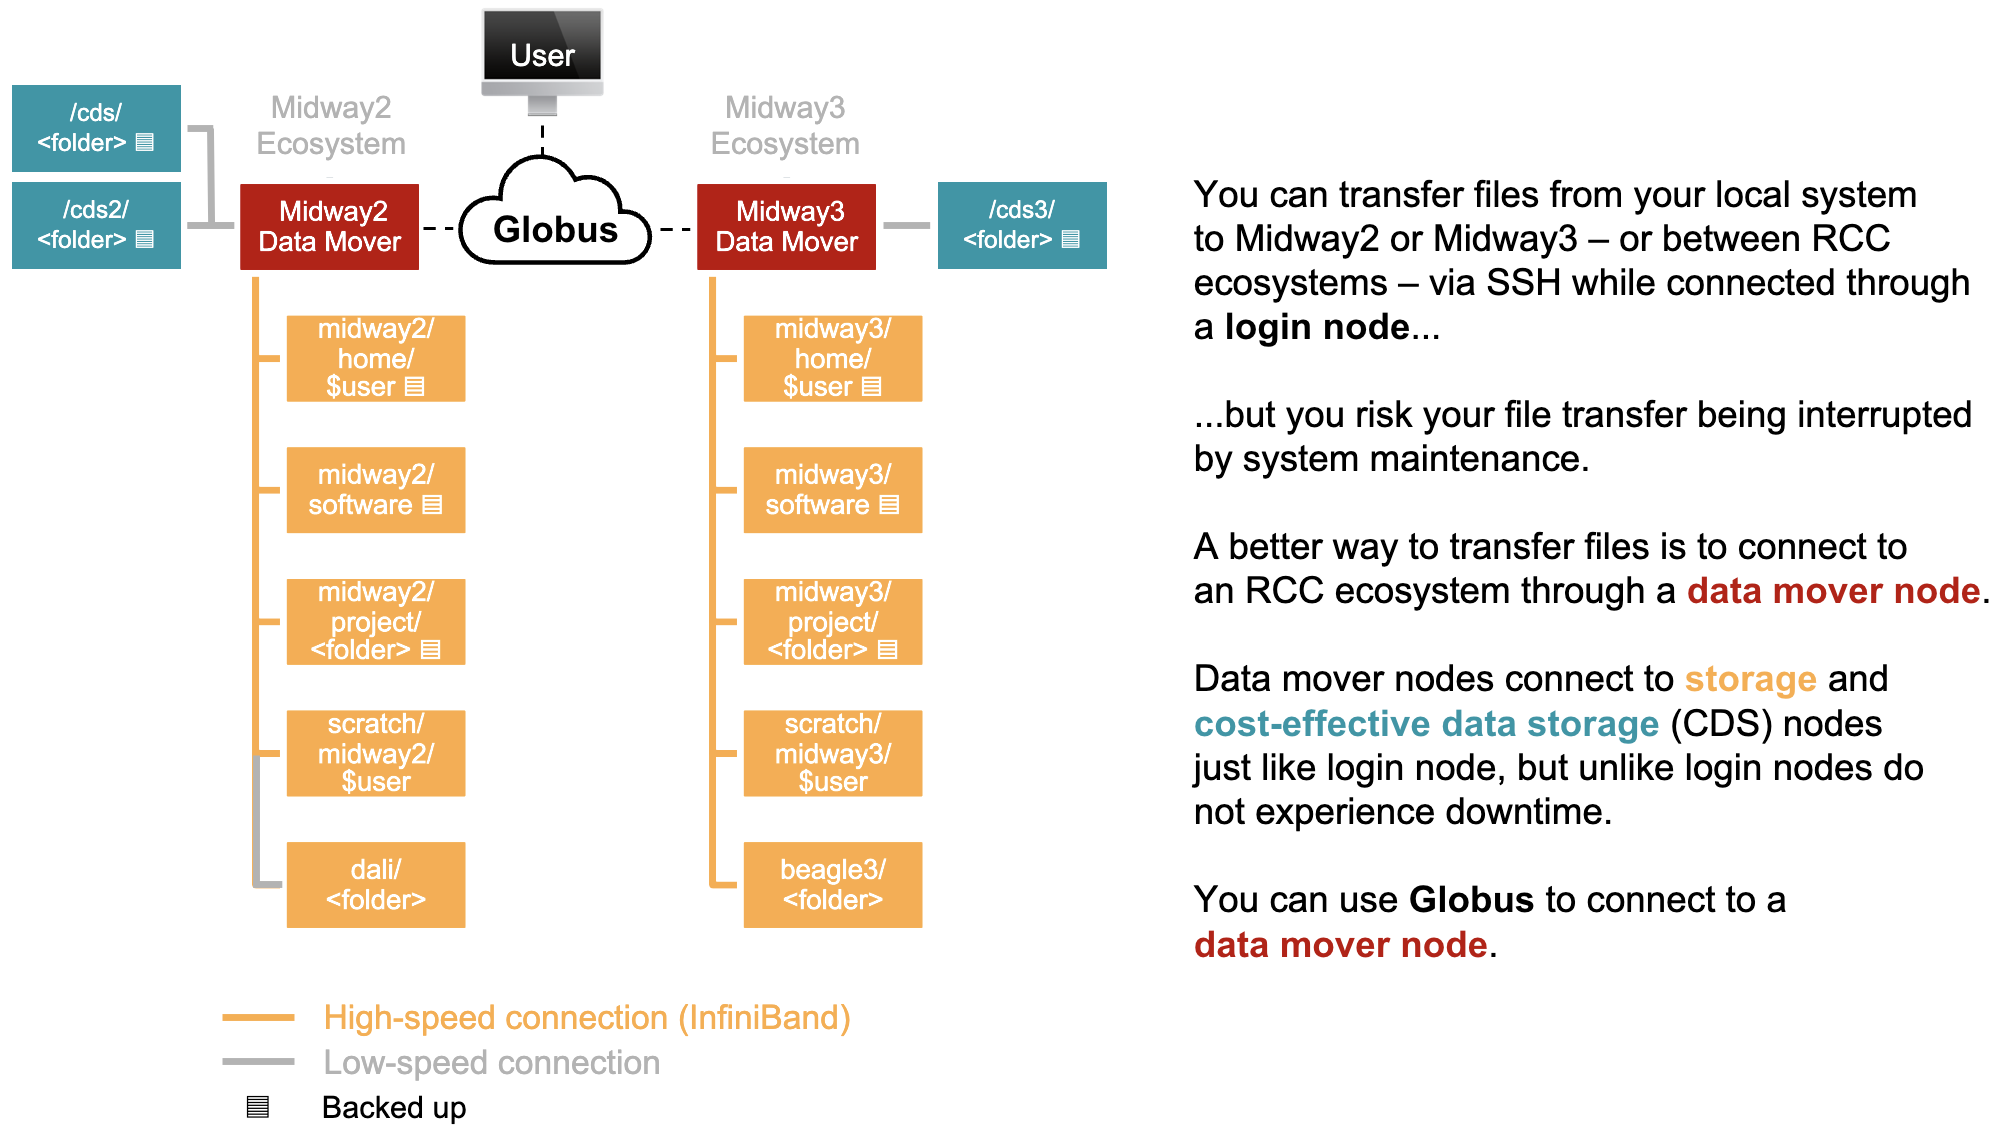 You can transfer files from your local system to Midway2 or Midway3 ecosystems or between RCC ecosystems via SSH while connected through a login node. Still, you risk your file transfer being interrupted if you get disconnected from the internet.​Globus and Samba (SMB) are two ways to connect to a data mover node.